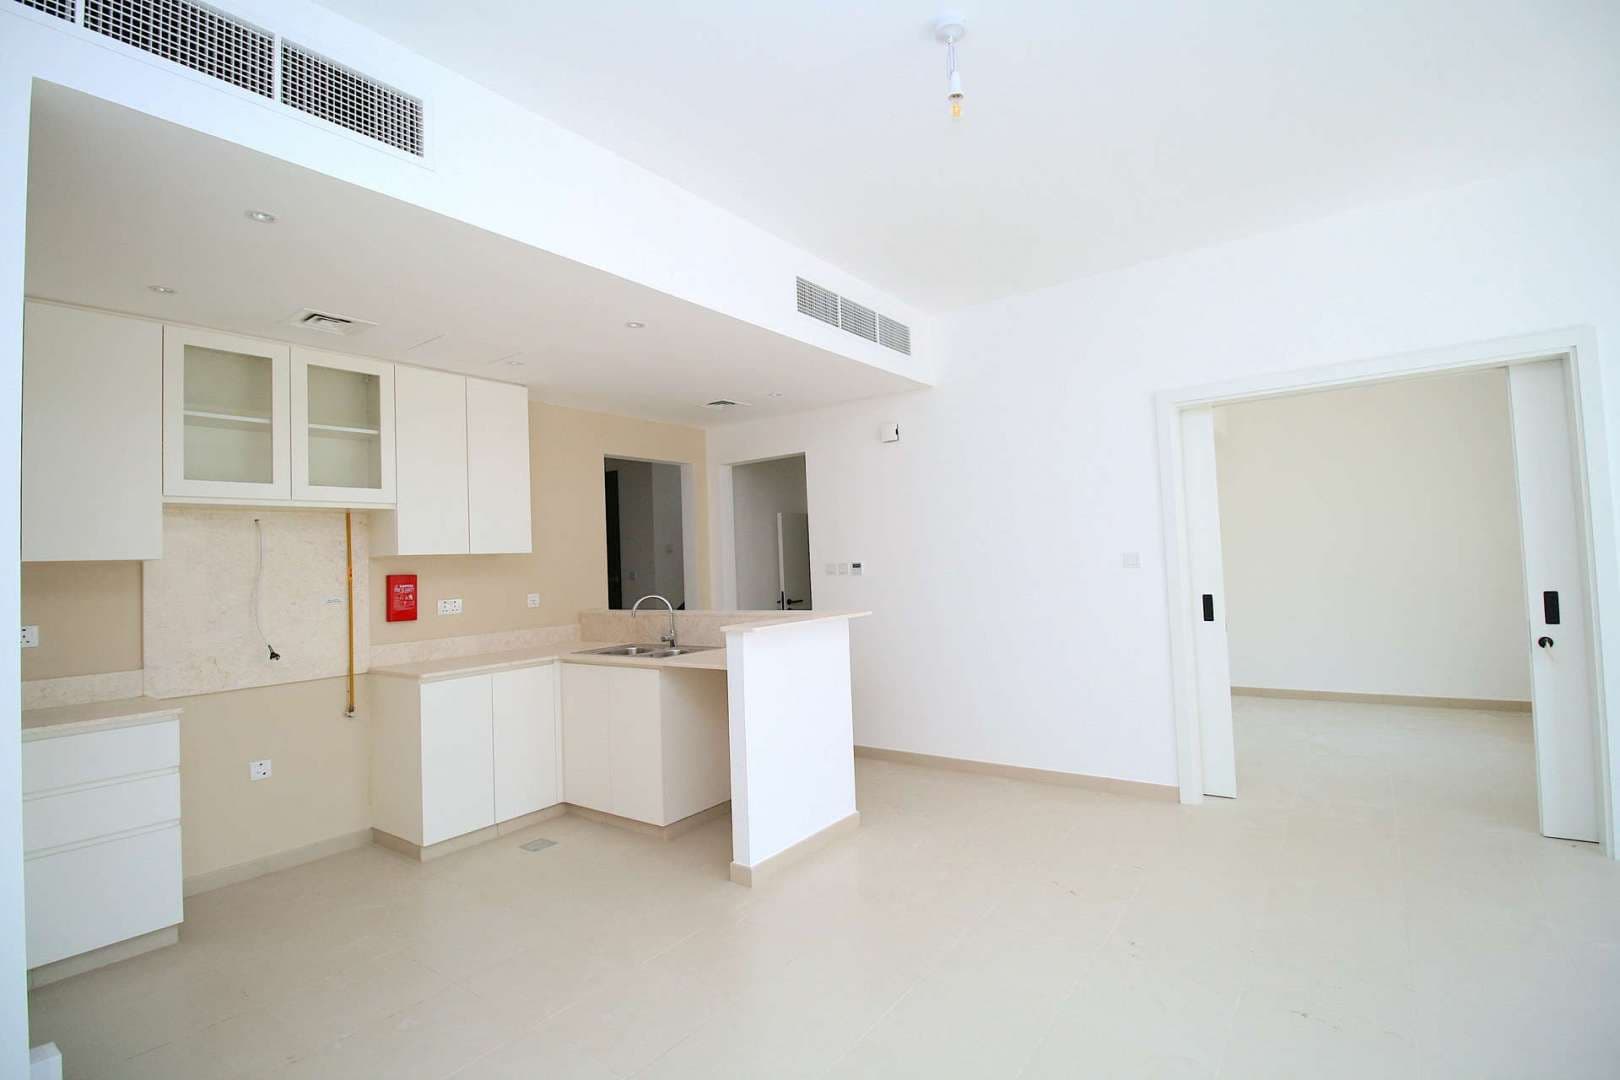 4 Bedroom Townhouse For Sale Safi Townhouses Lp05812 14a1dceca1088100.jpeg